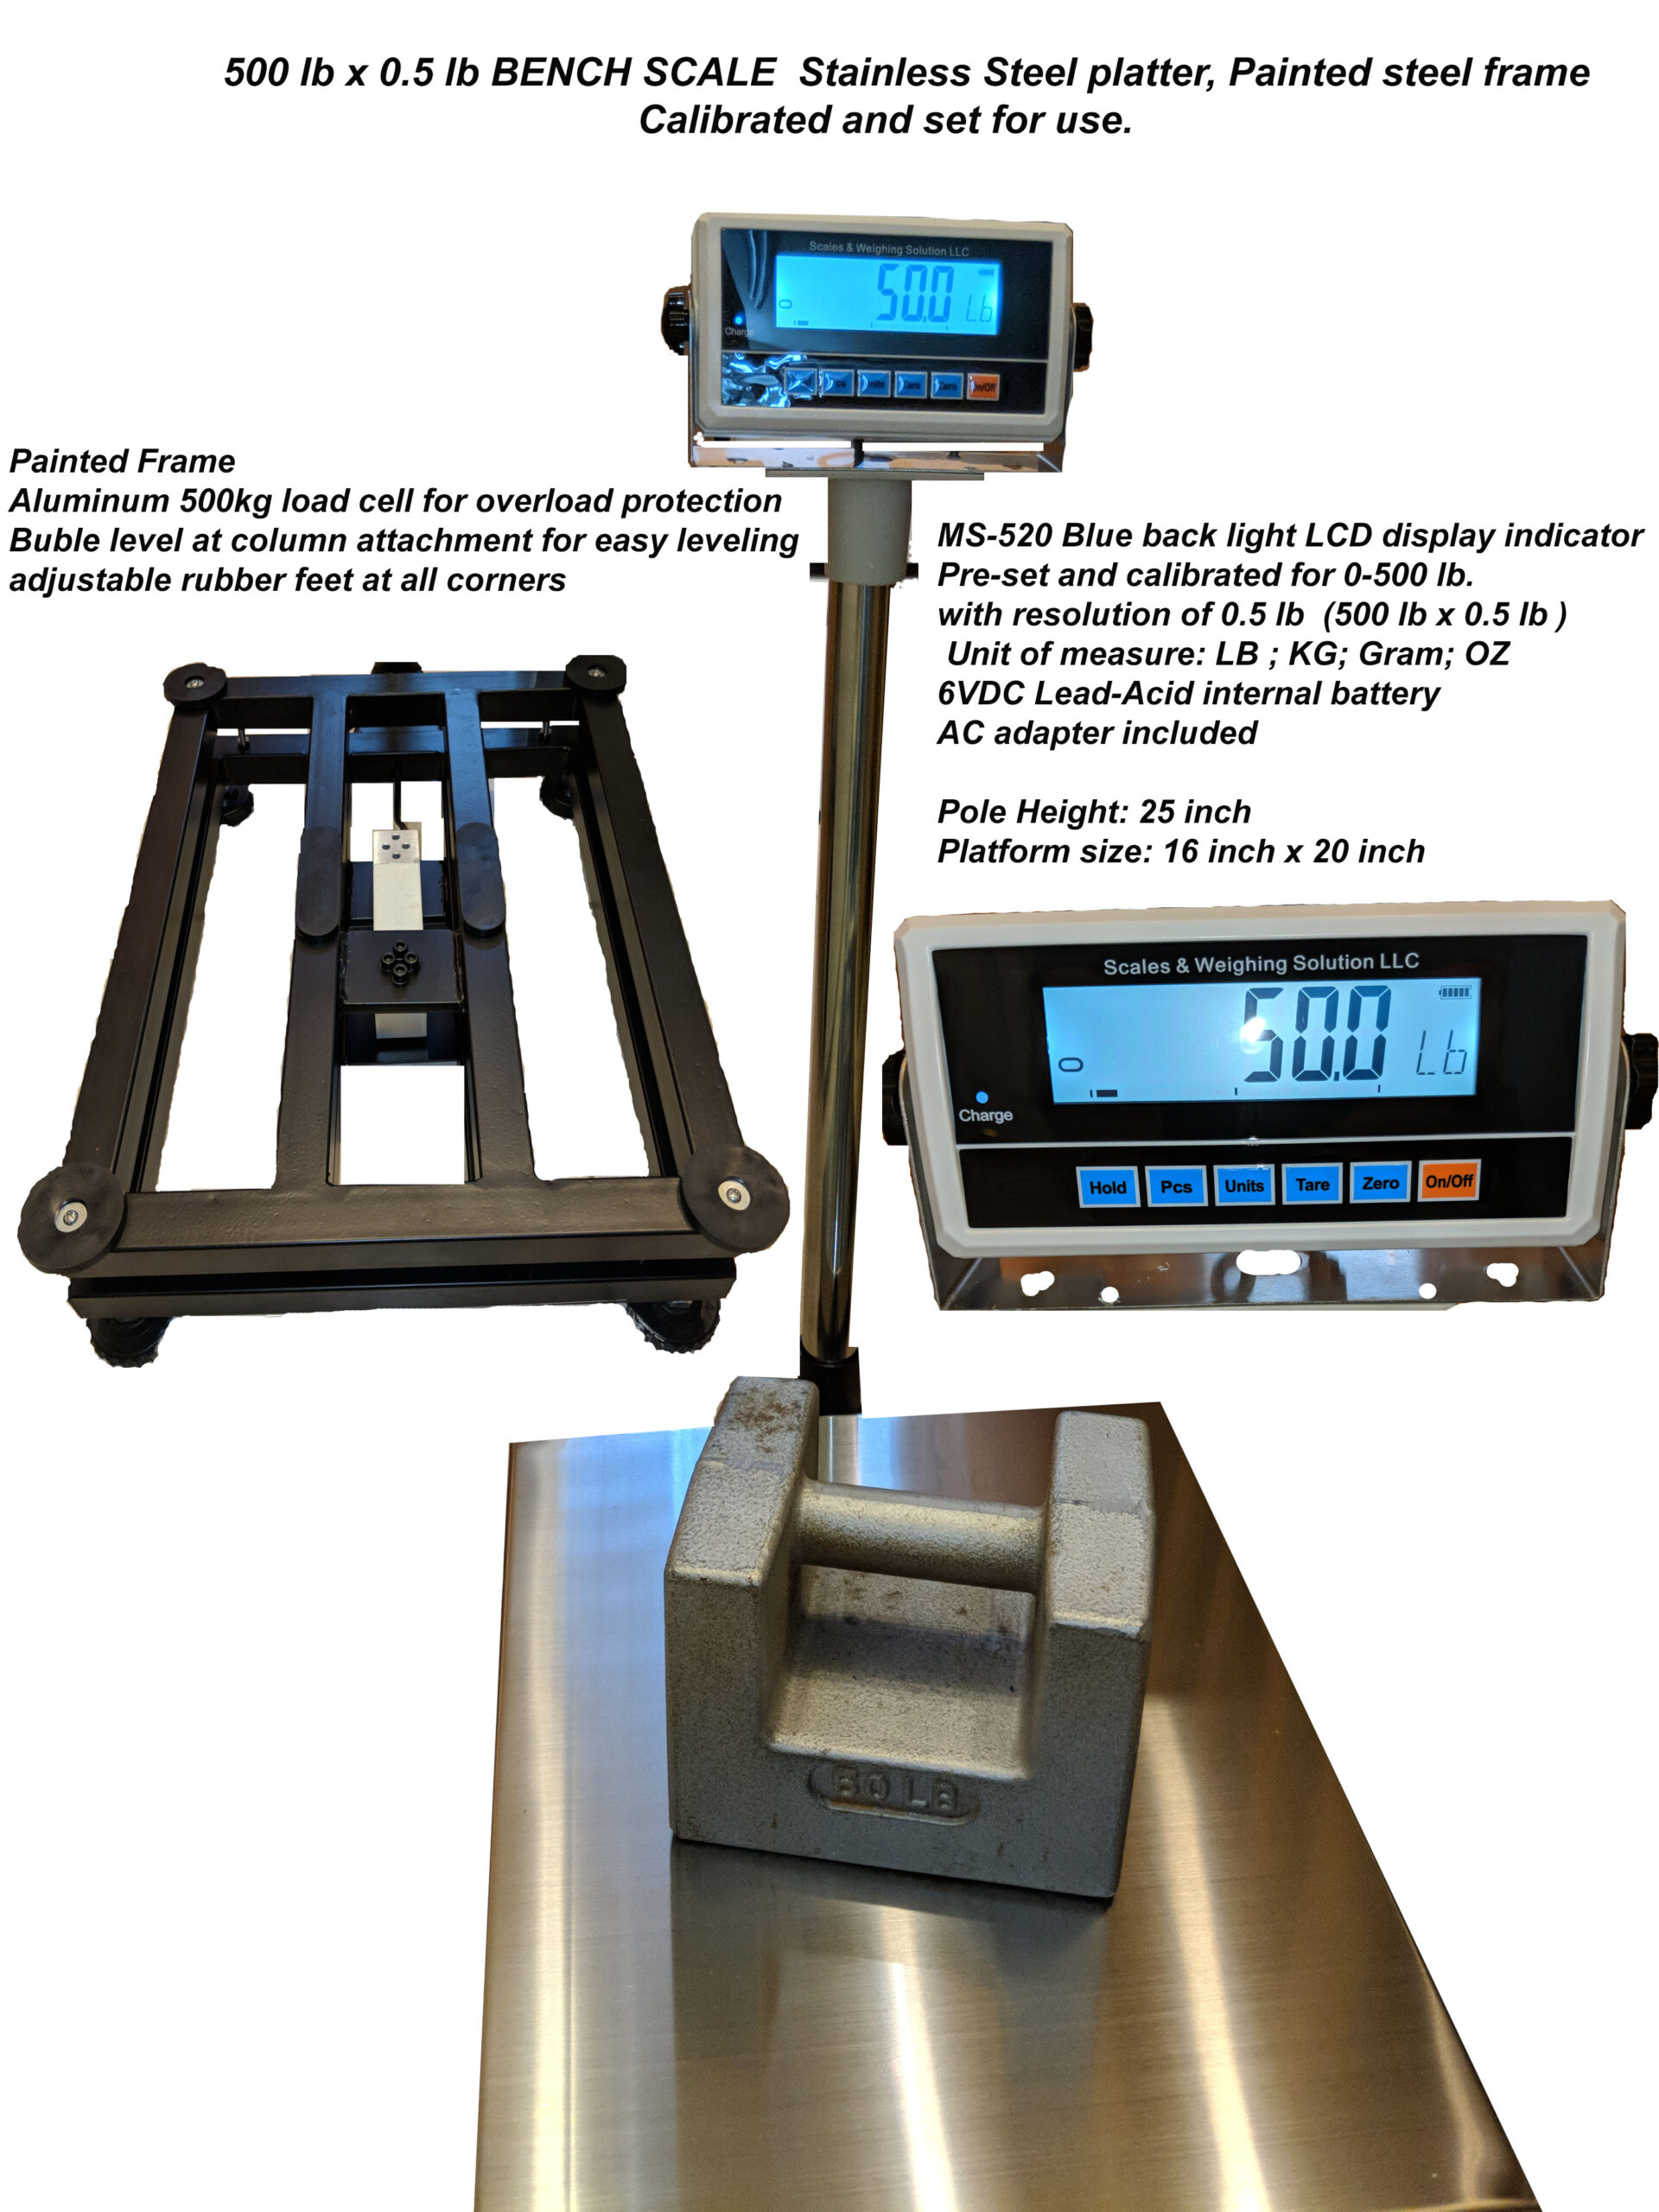 Bench Scale 300 lb Industrial bench Bench scale Industrial bench scale